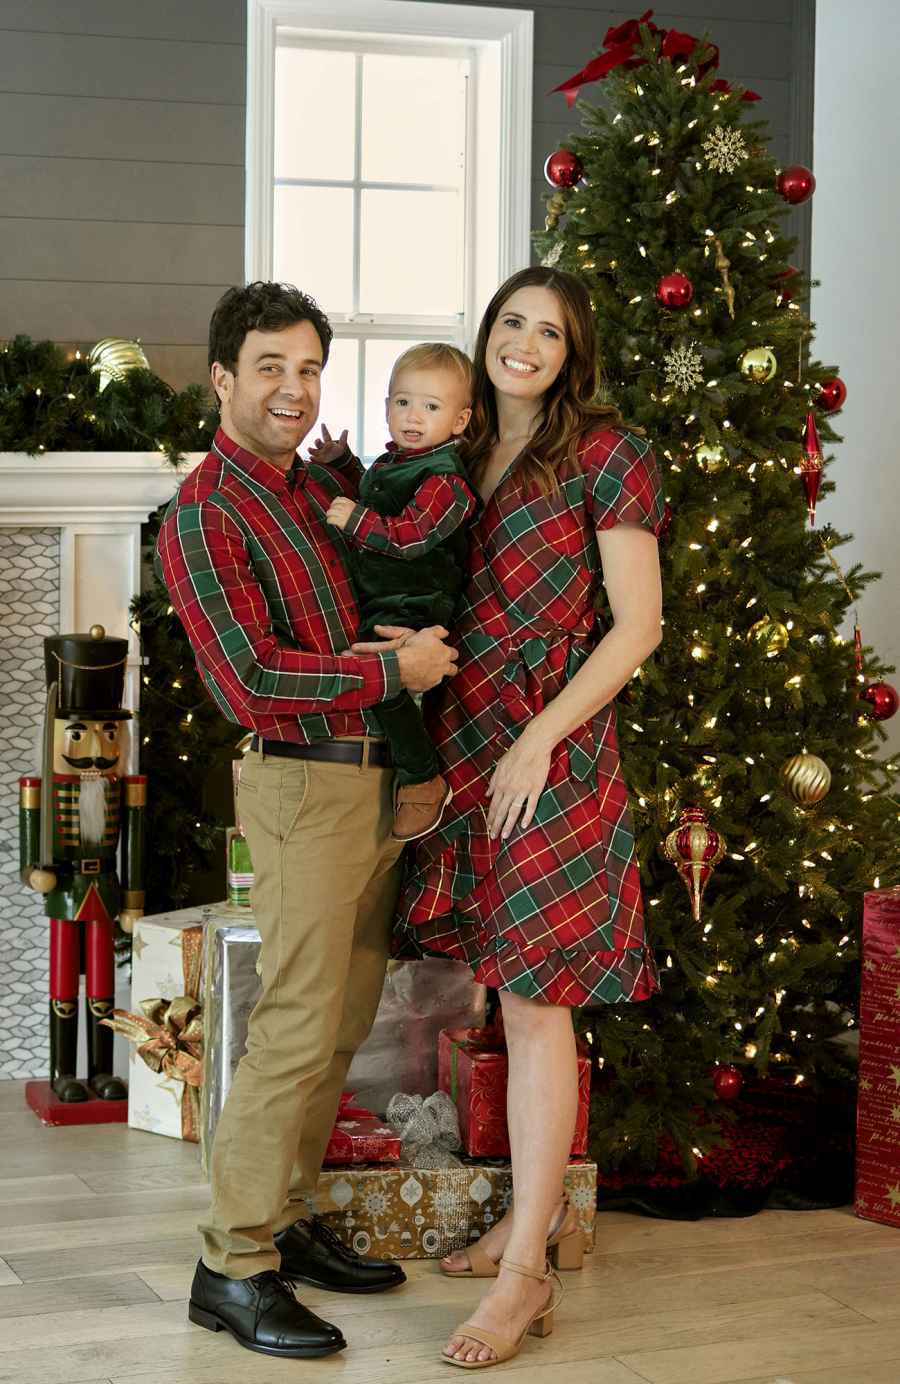 So Cute! Mandy Moore Stars in Holiday Ad With Husband Taylor, Son Gus: Pics